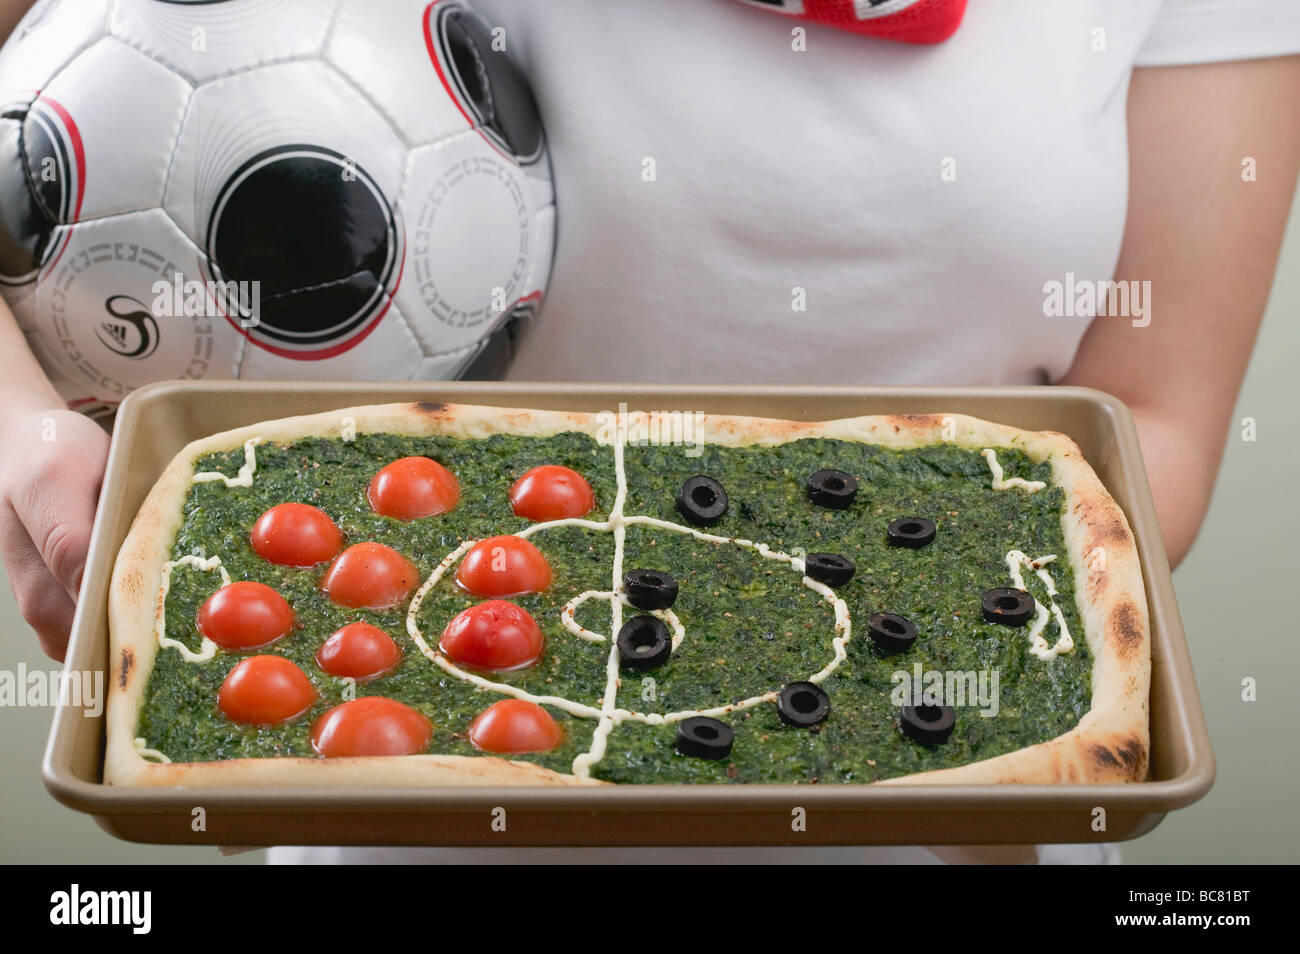 Female footballer holding spinach pizza with tomatoes & olives - Stock Photo